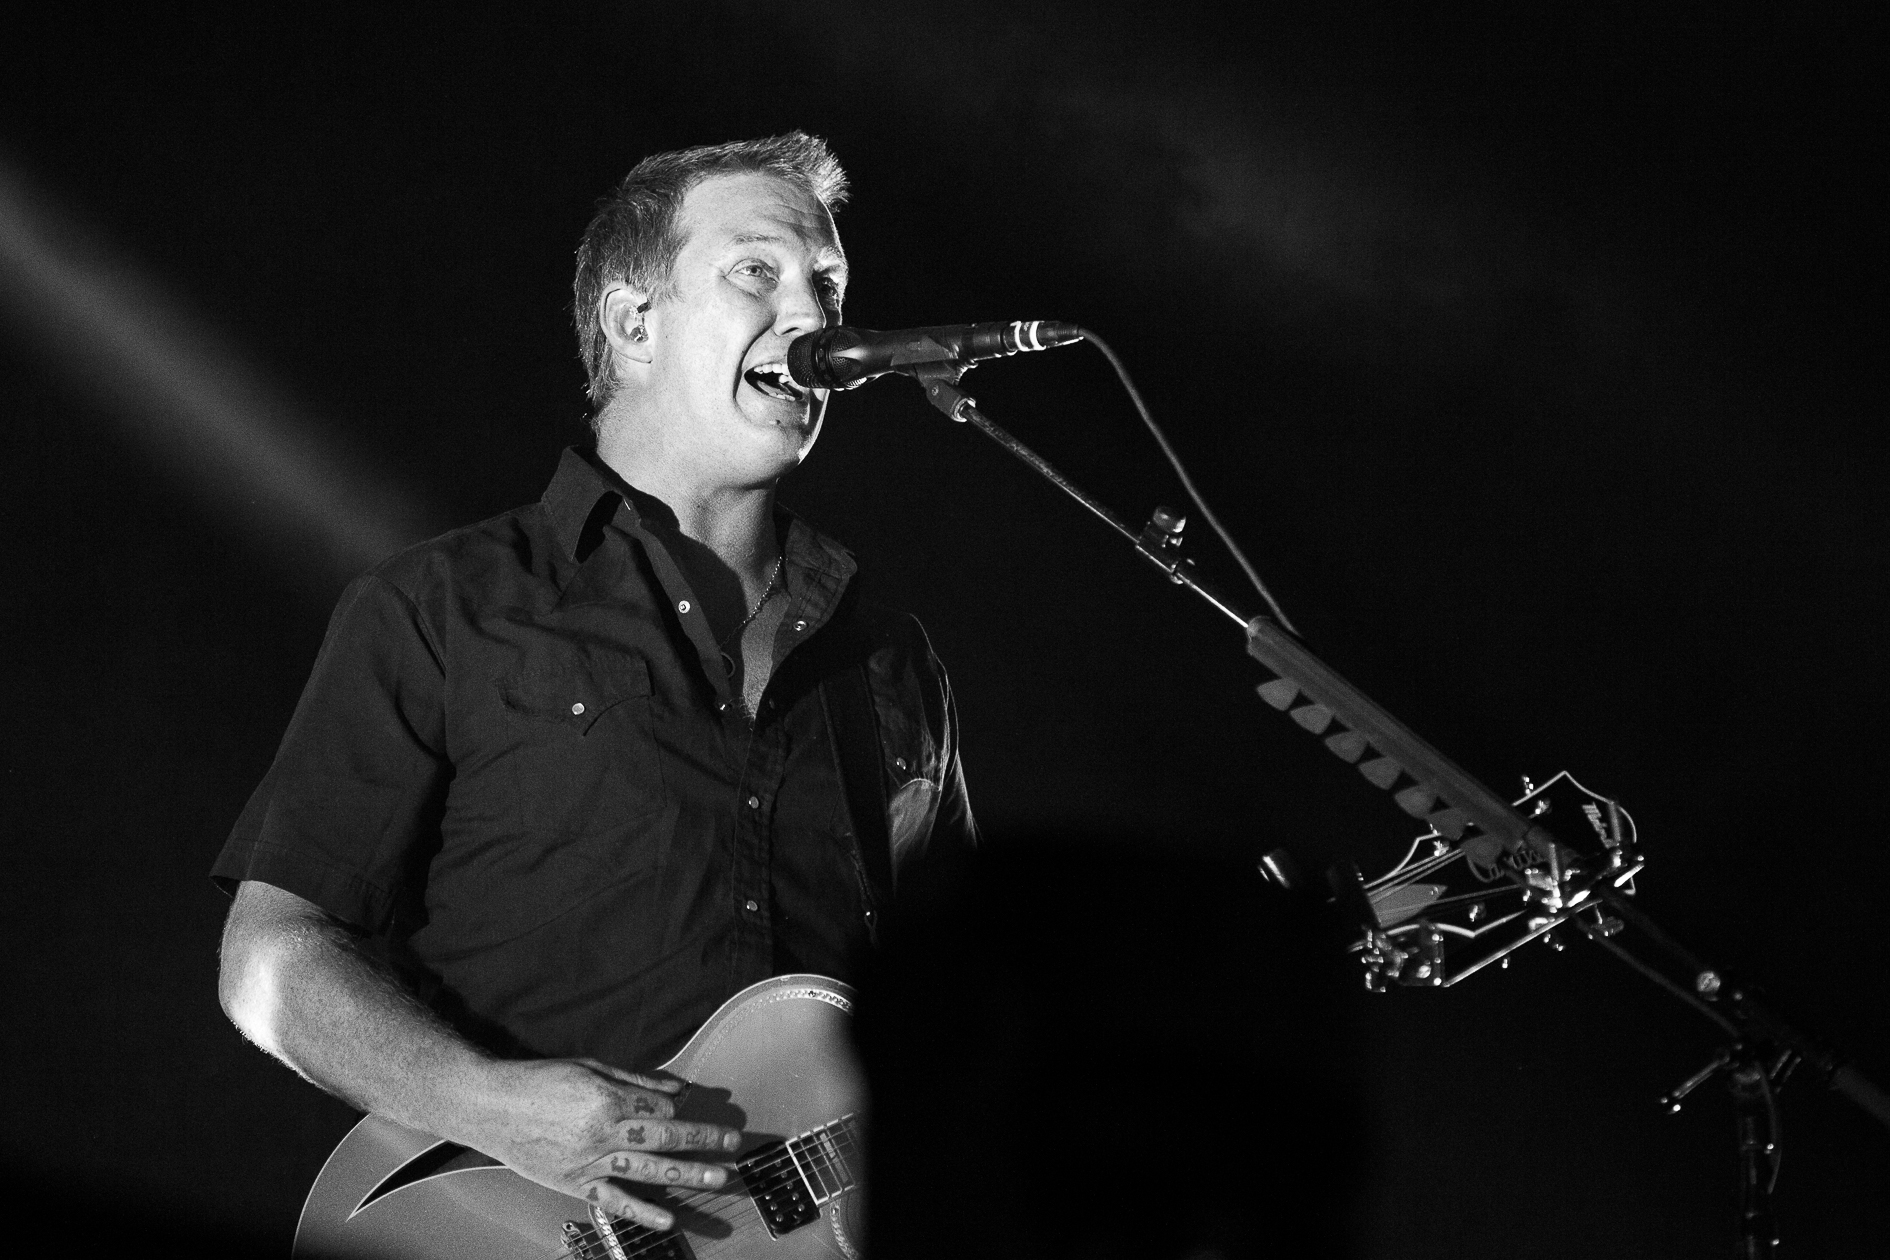 Joshua Michael Homme of Queens Of The Stone Age